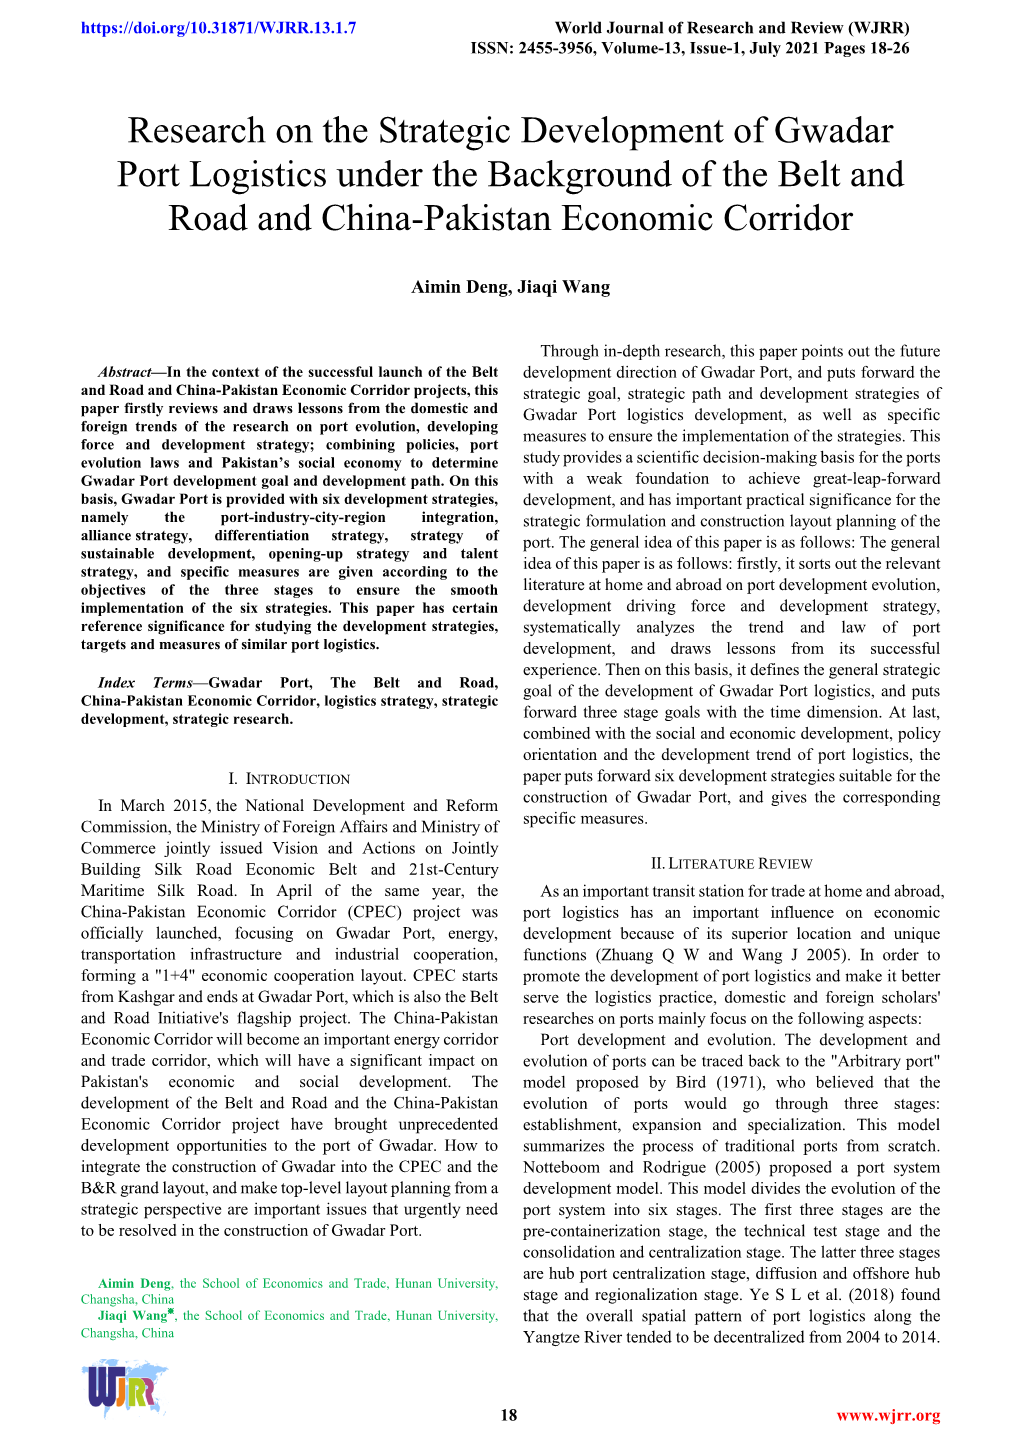 Research on the Strategic Development of Gwadar Port Logistics Under the Background of the Belt and Road and China-Pakistan Economic Corridor